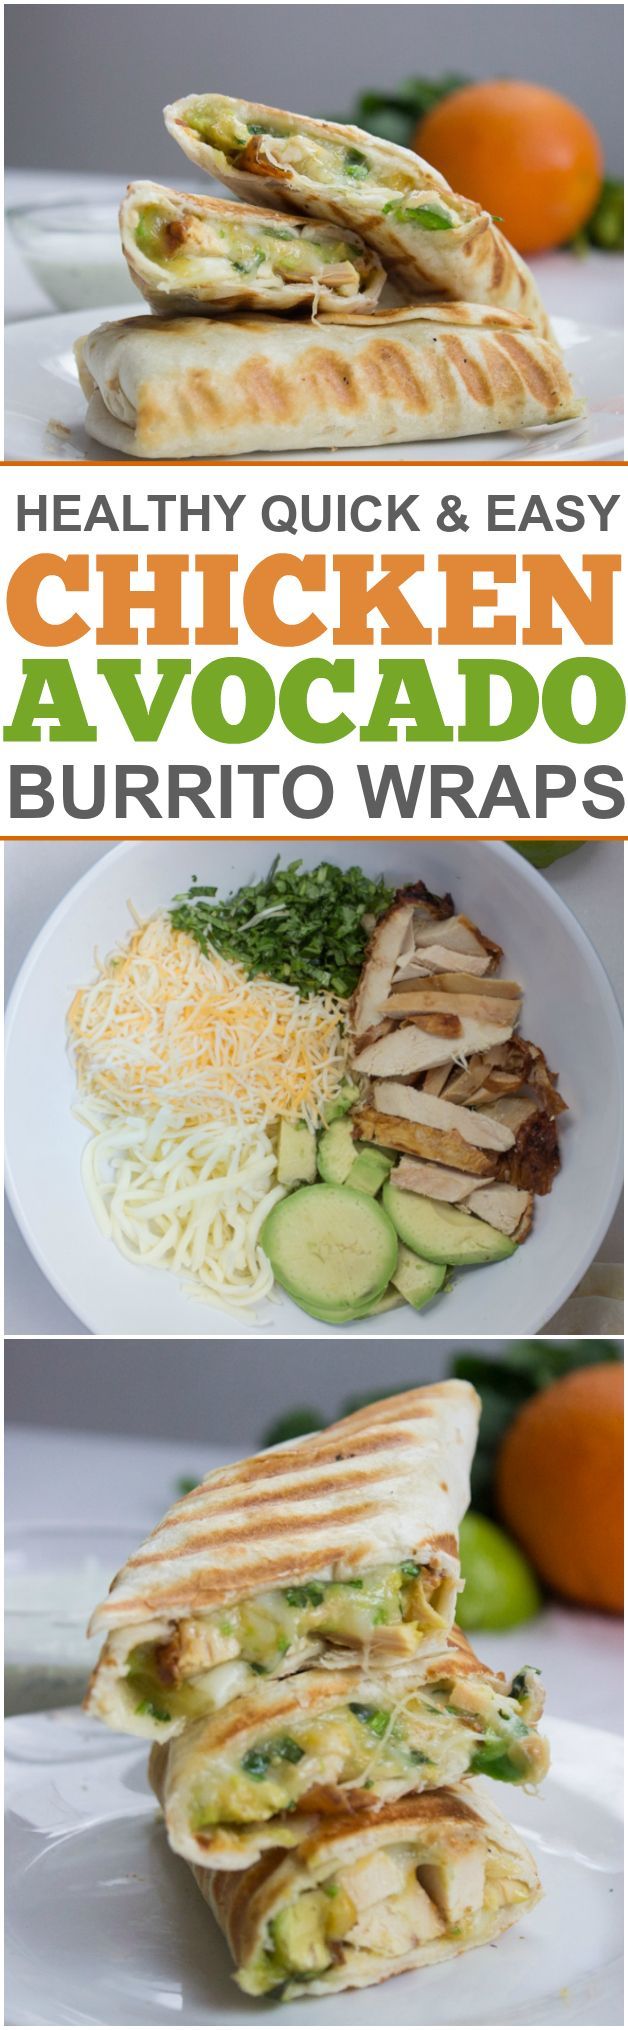 Quick and Easy Chicken and Avocado Burritos (Under 10 Minutes!)